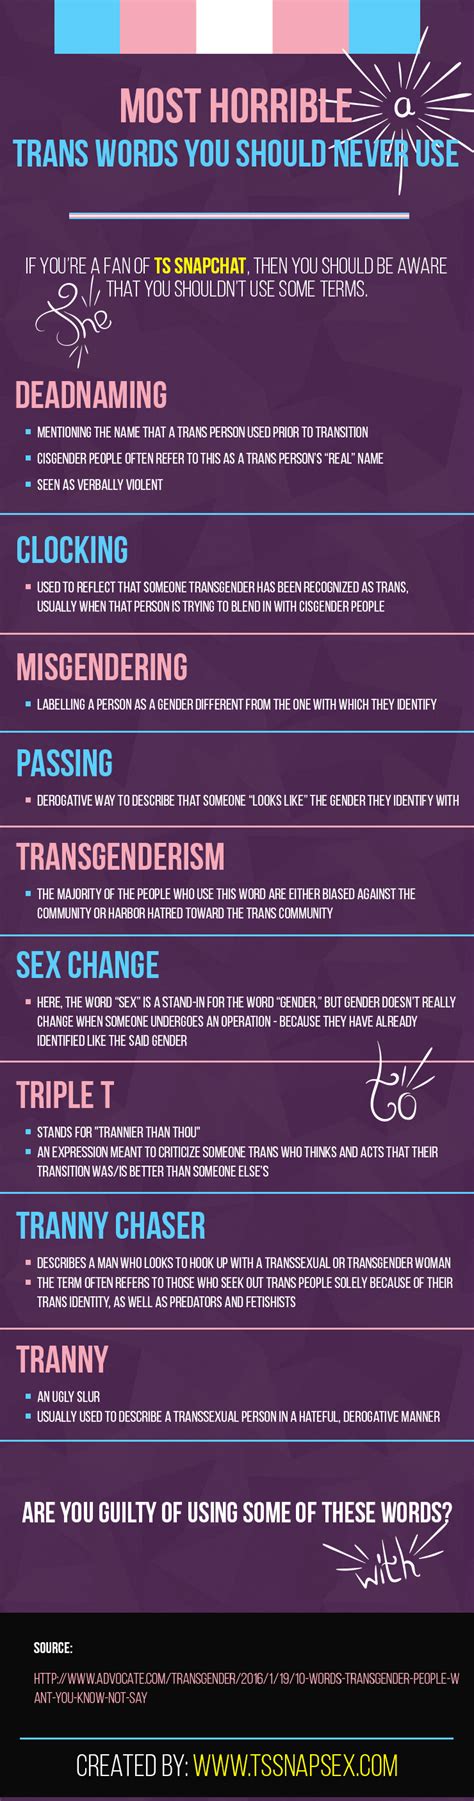 if you re a fan of ts snapchat then you should be aware that you shouldn t use some terms